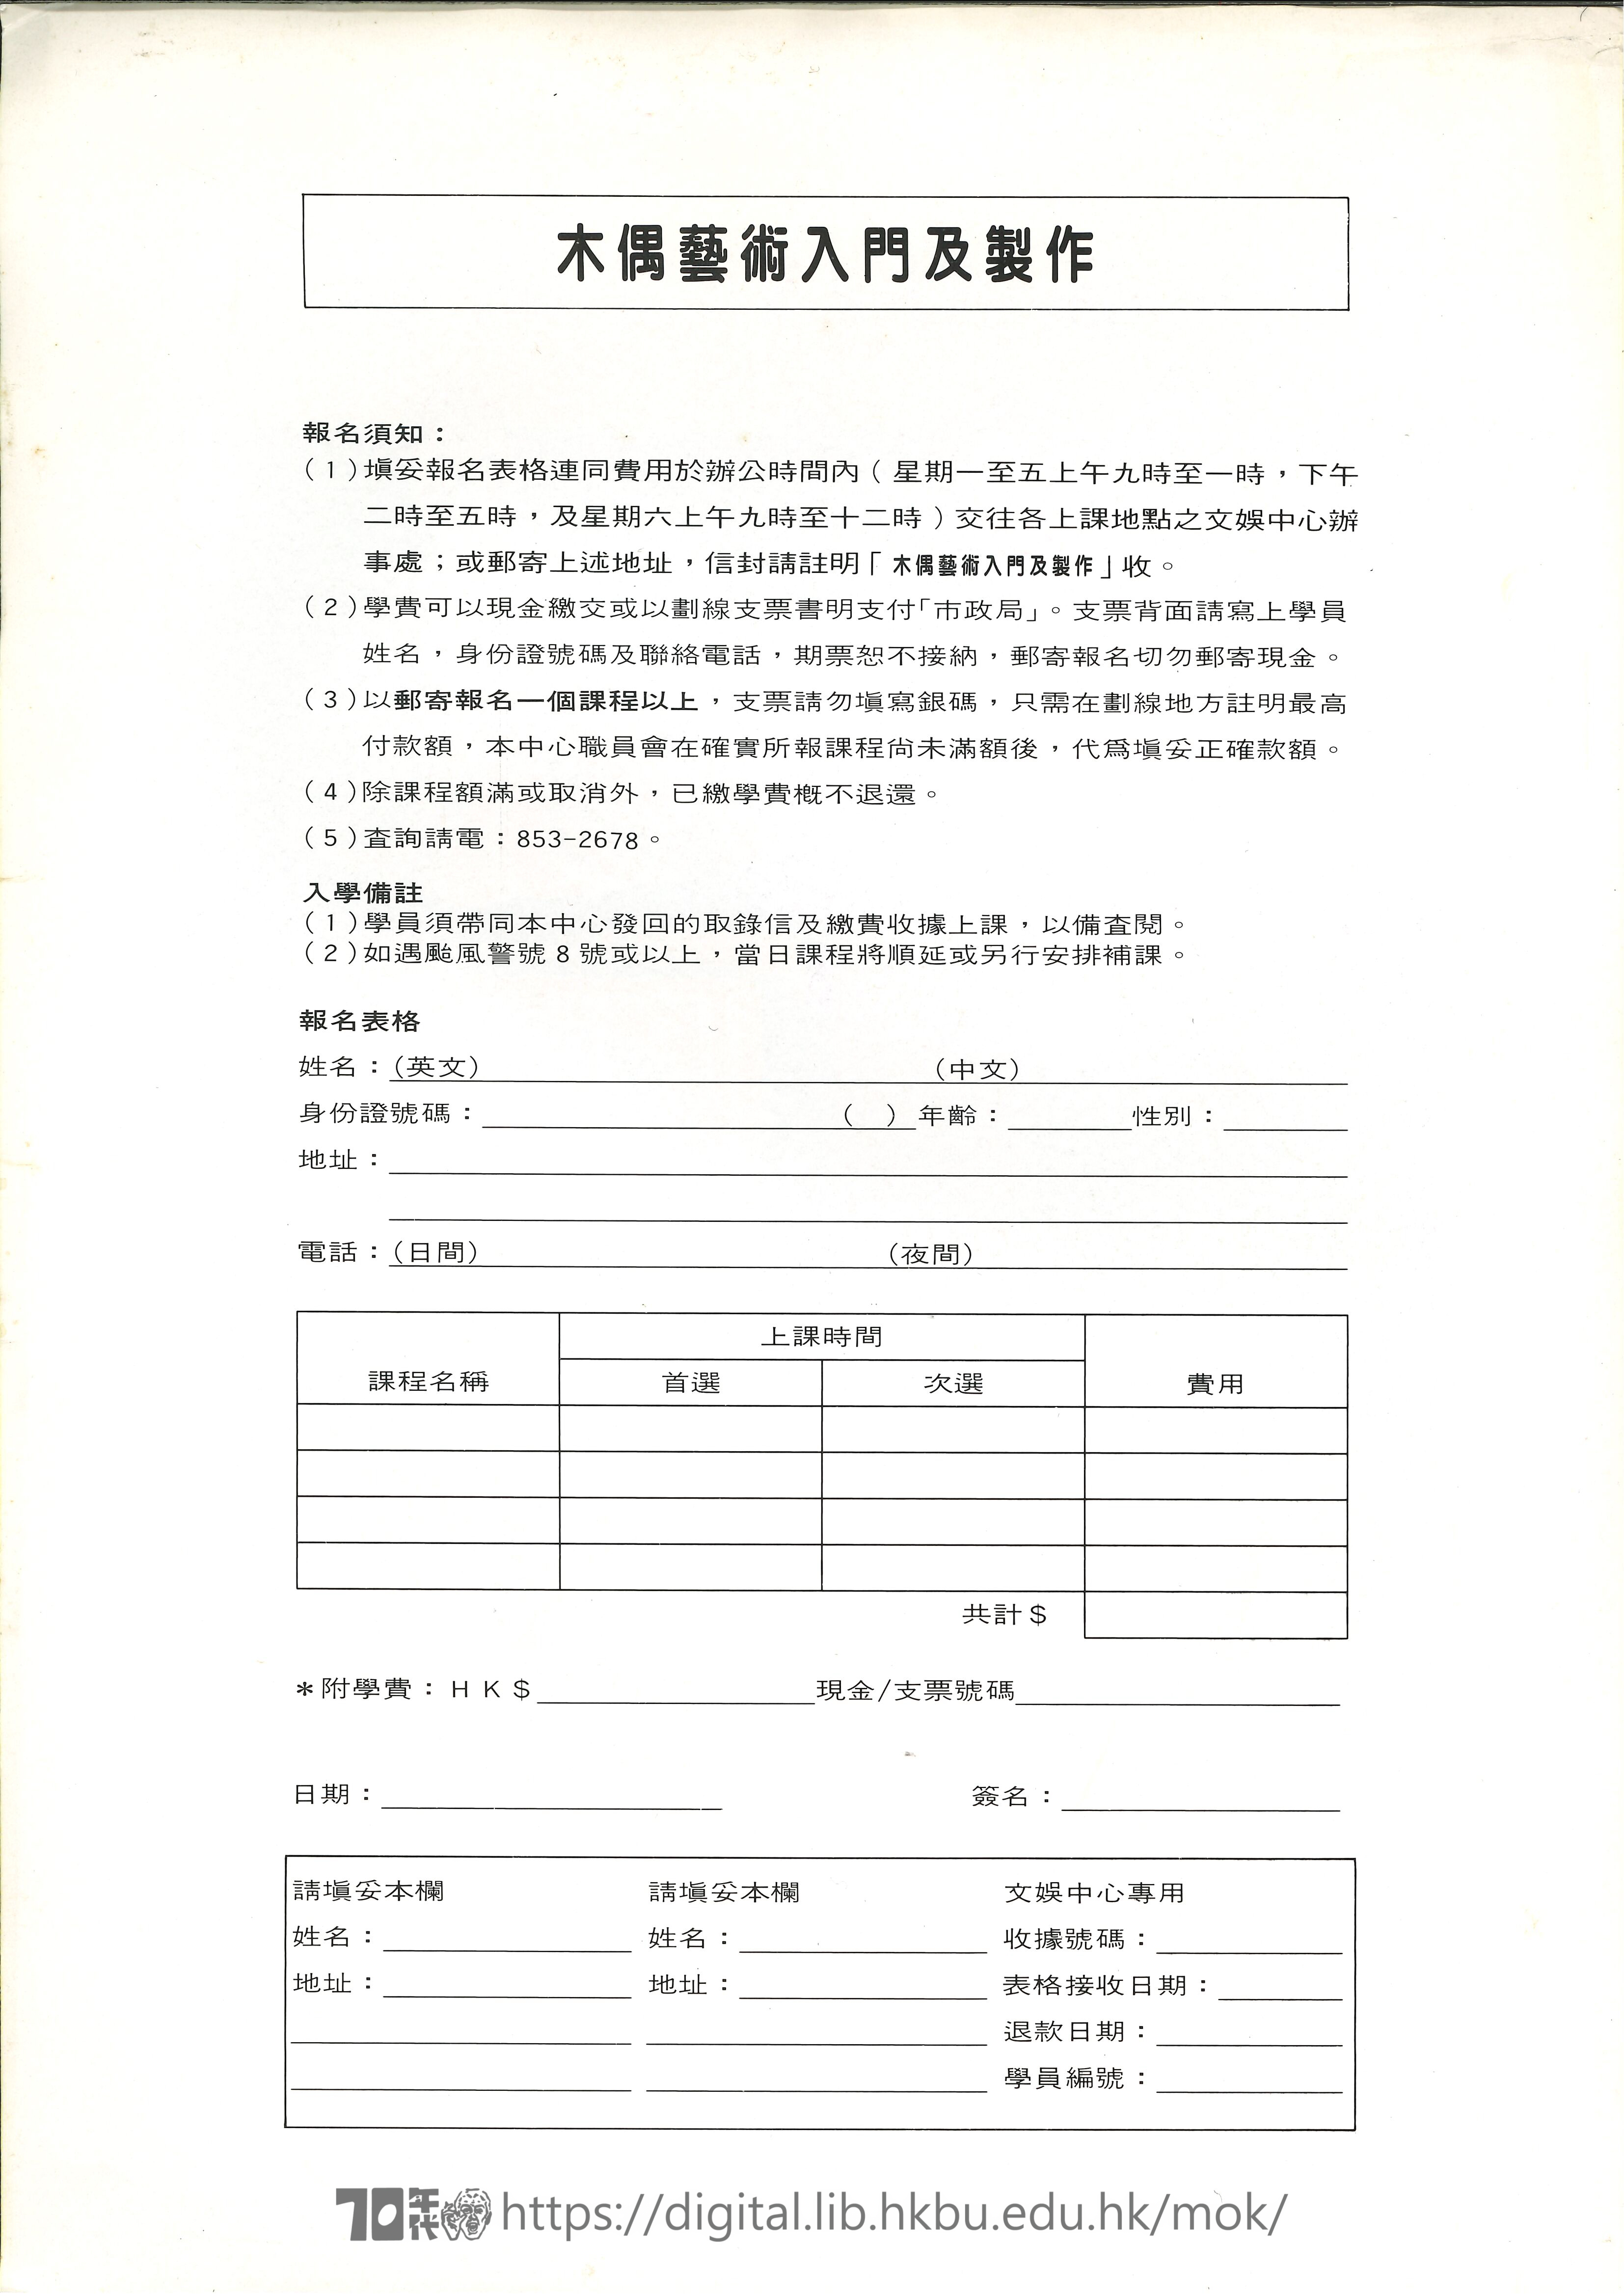 Puppet theatre  Information and registration form for workshop organised by Hong Kong Arts Centre and Asian Theatre Festival Society  